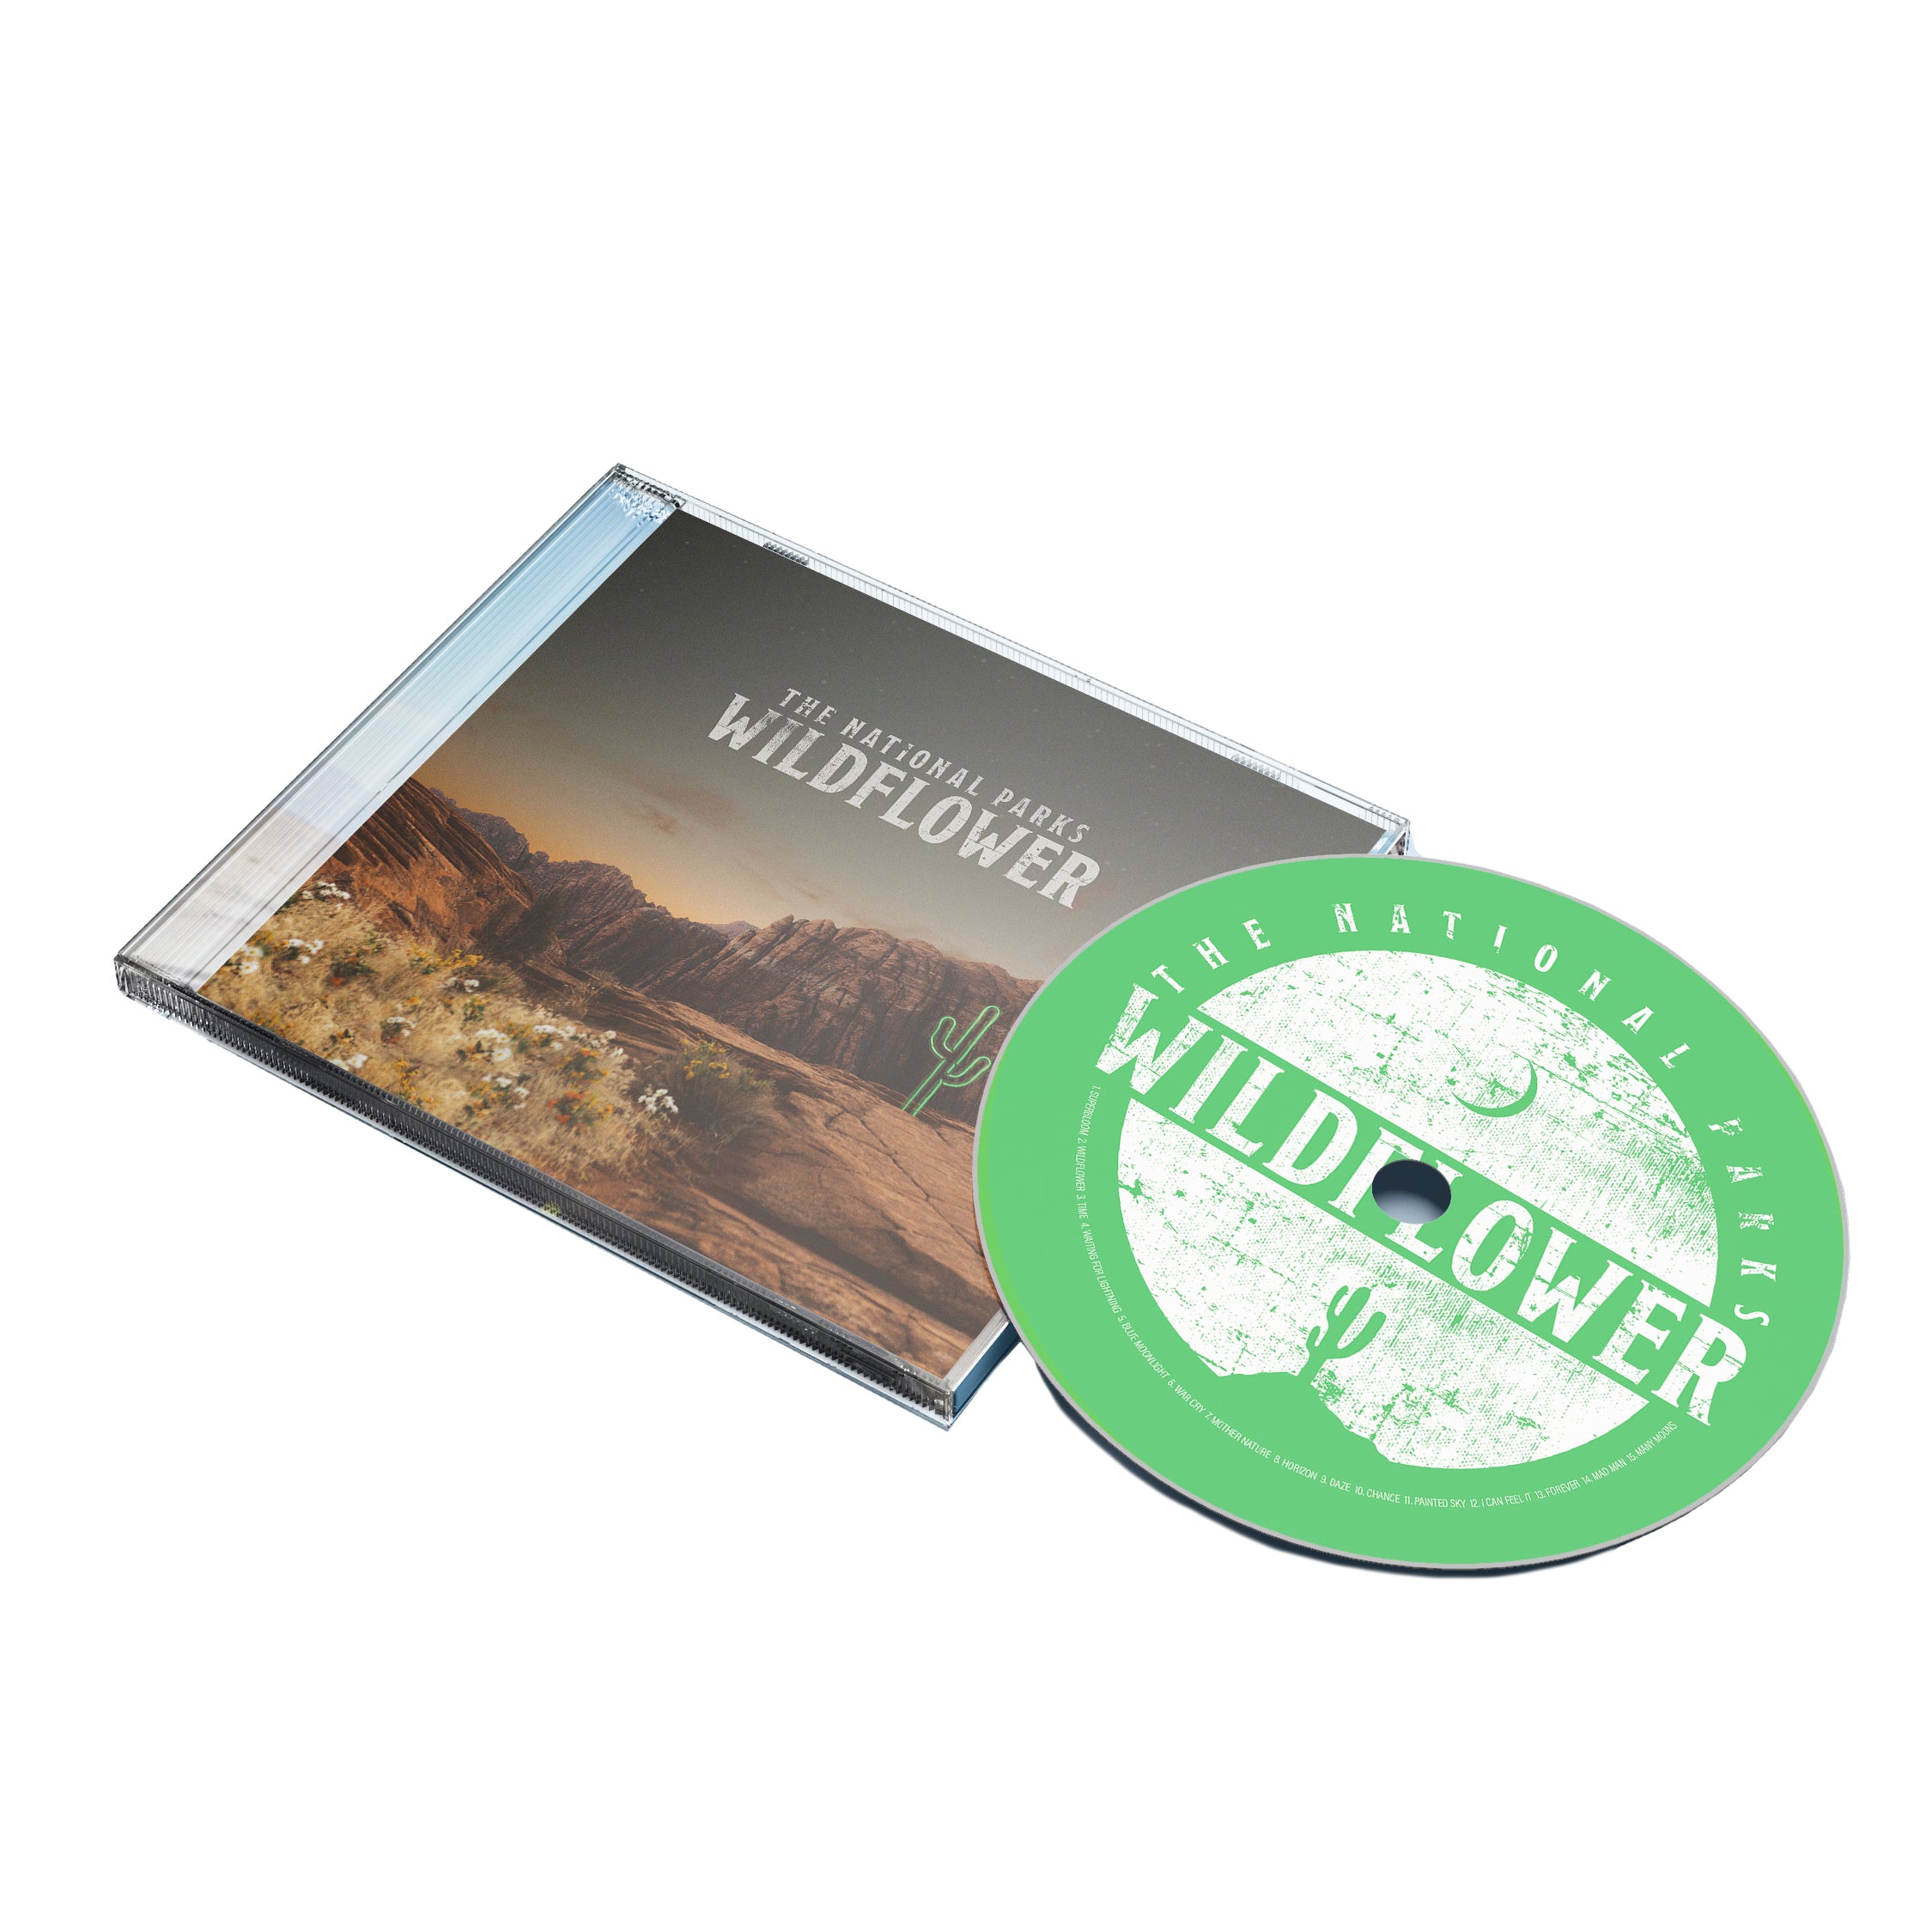 The National Parks | Wildflower CD + Digital Download